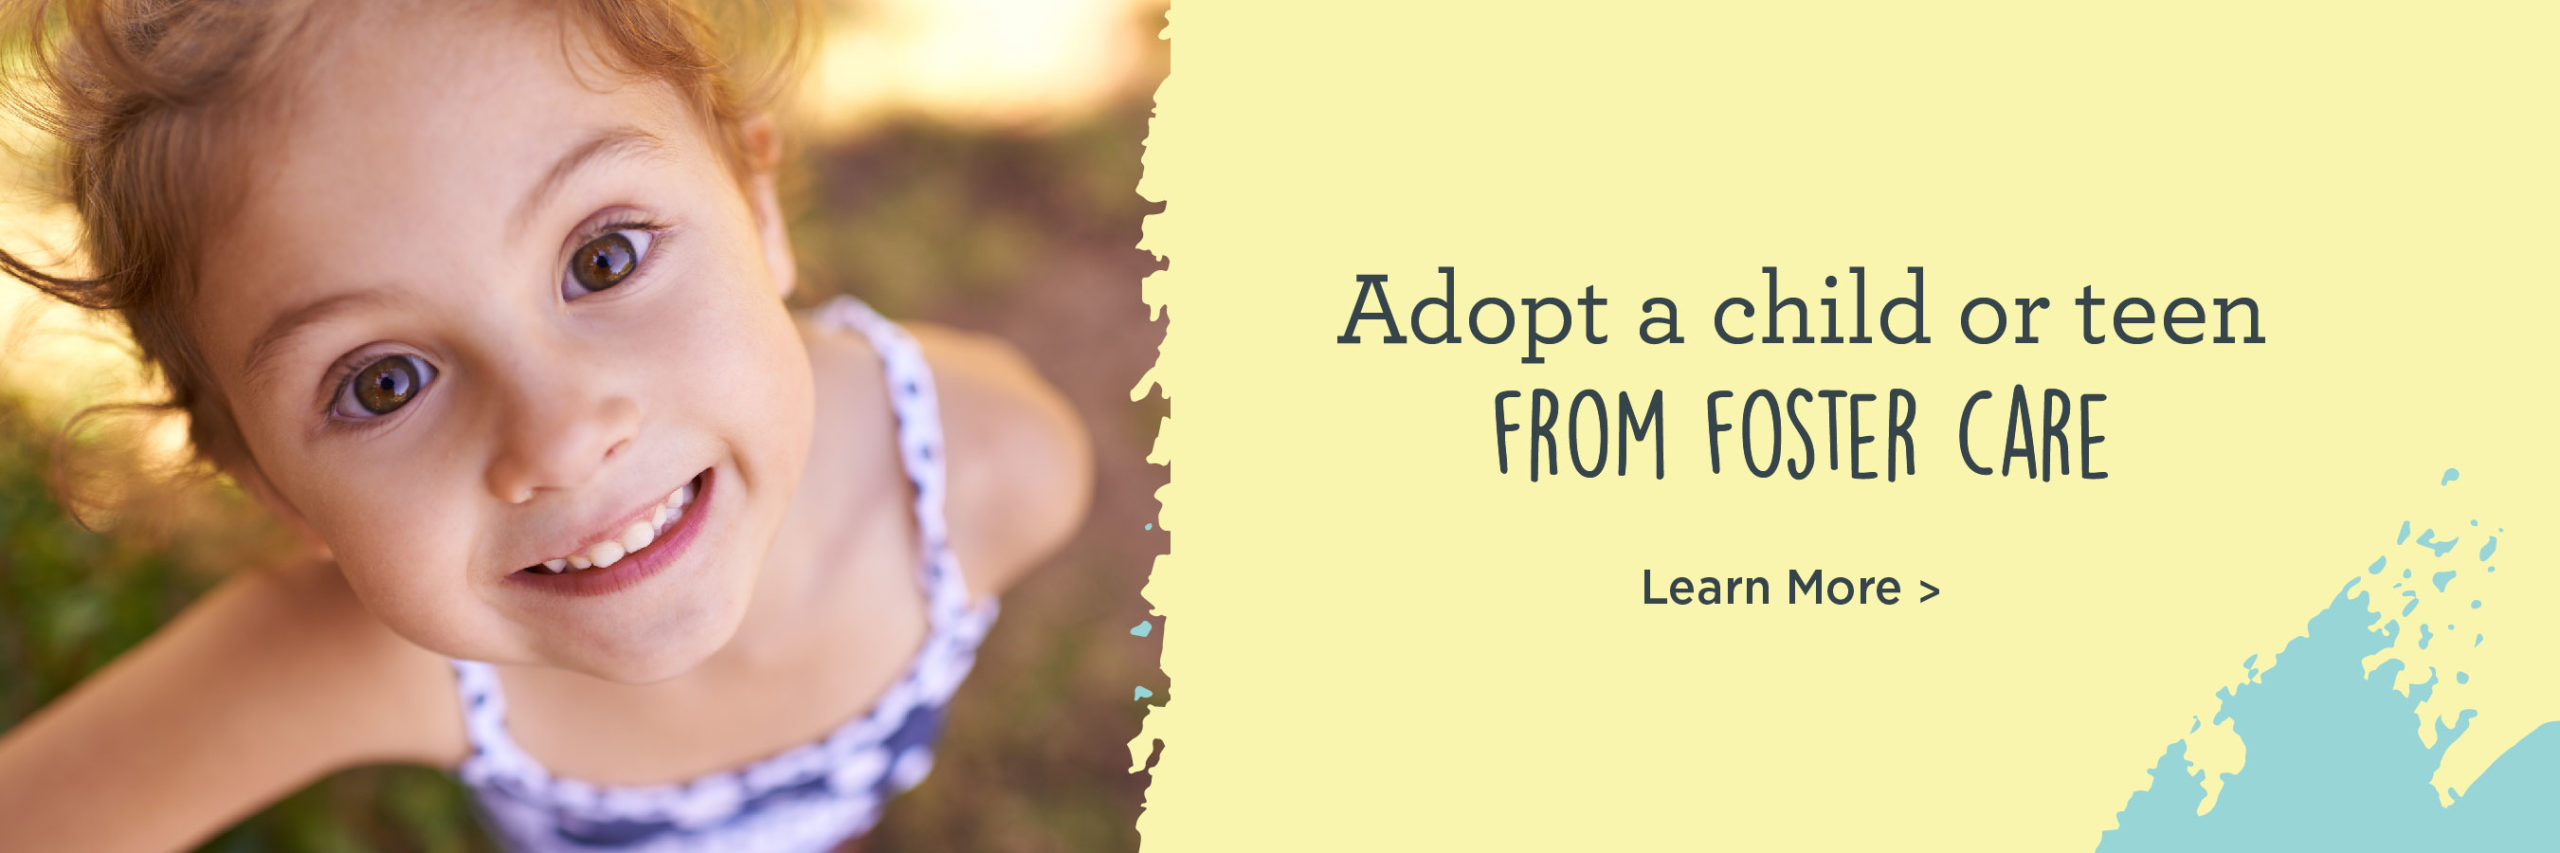 Adopt a child or teen from foster care 